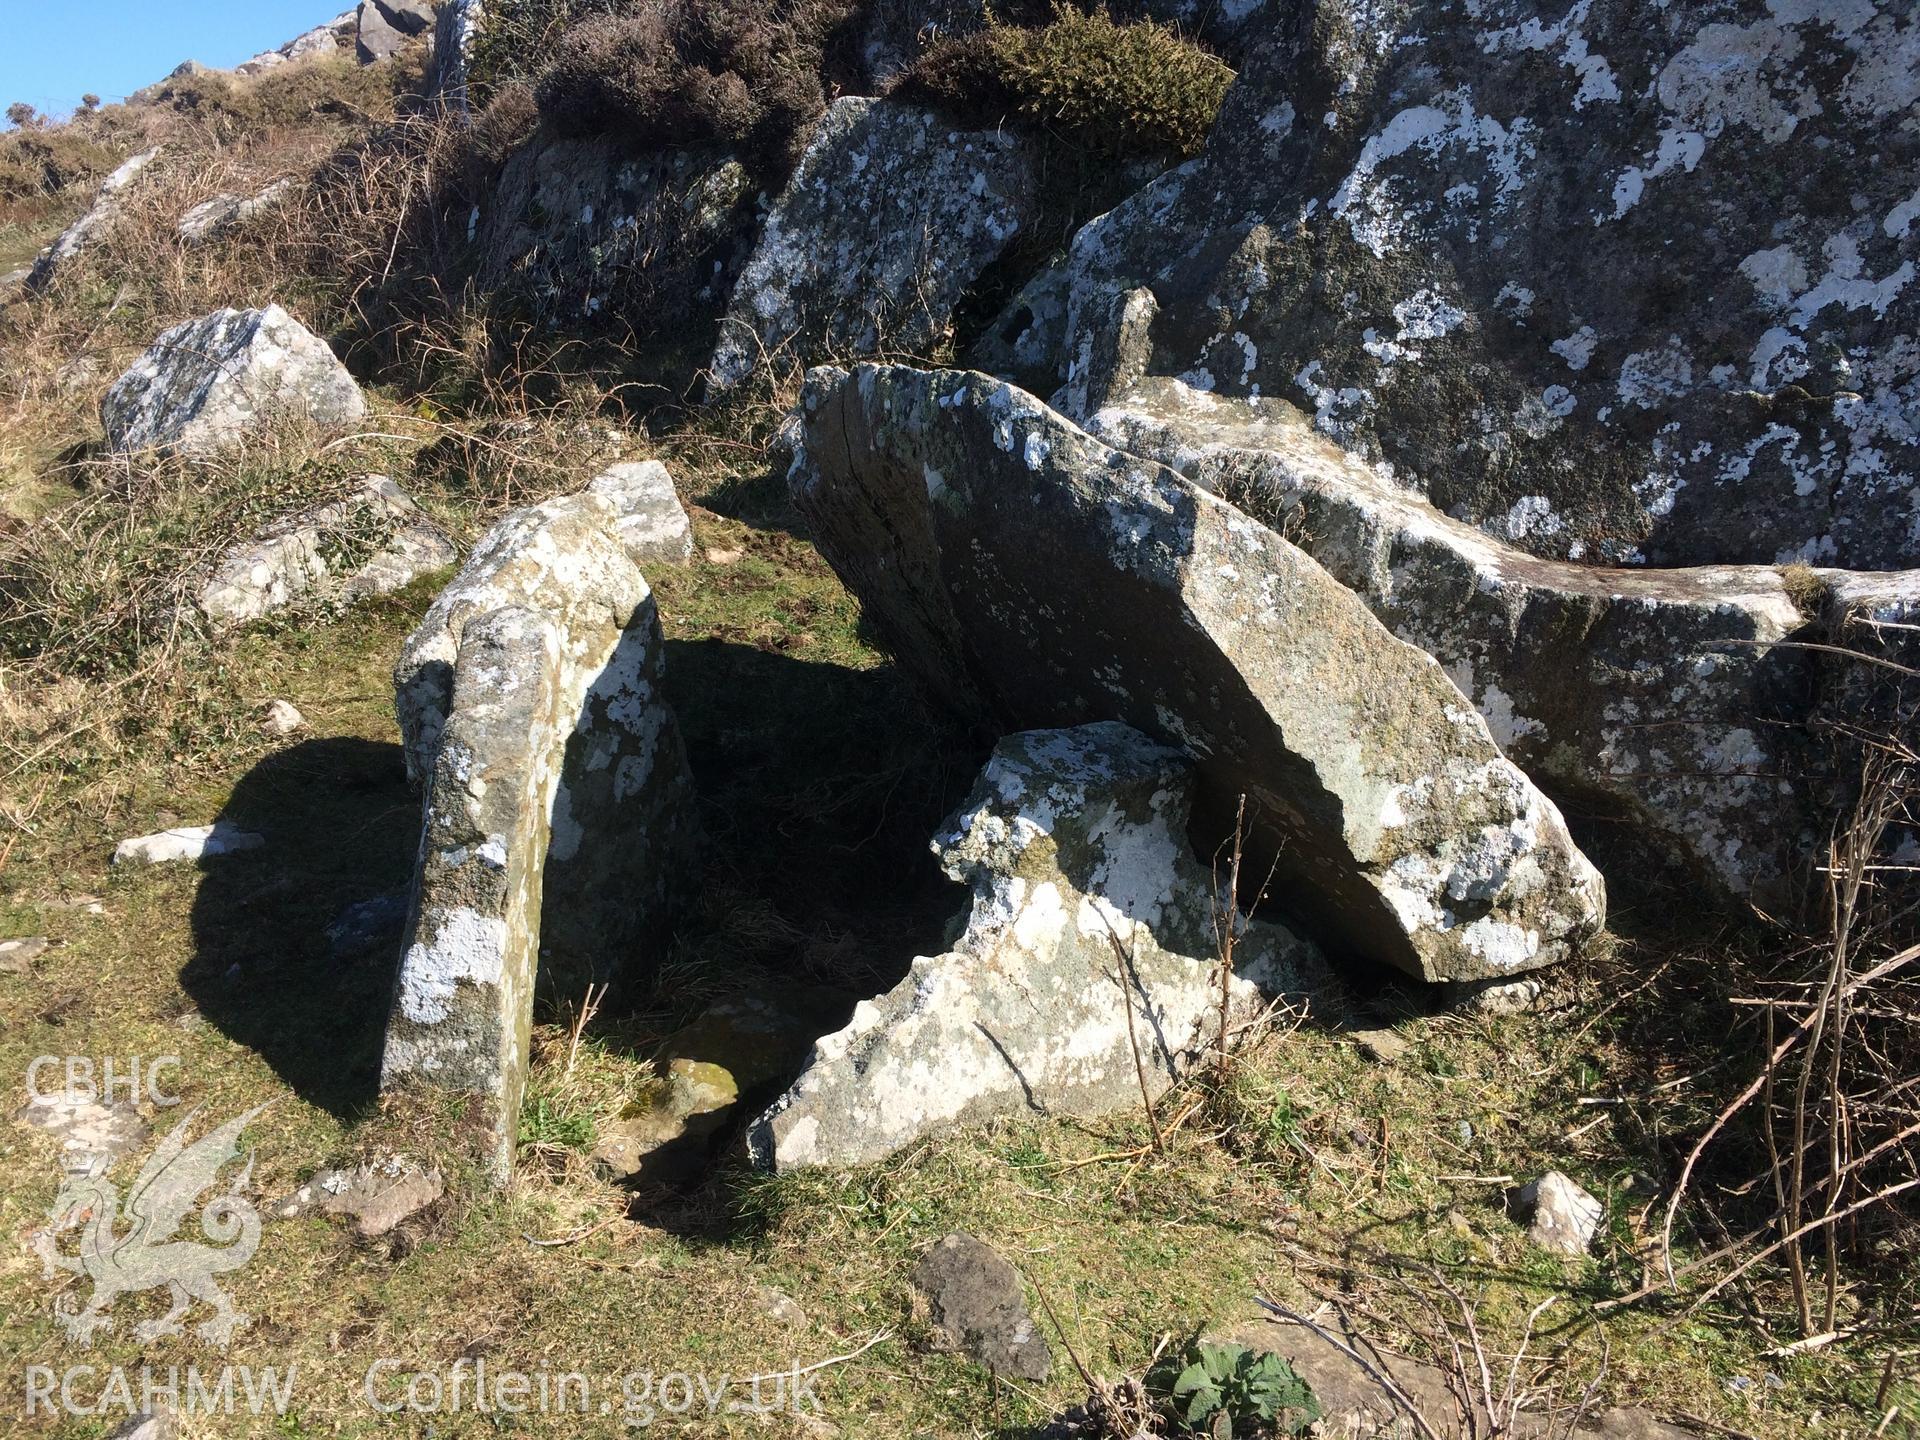 Colour photo showing view of Carn Llidi Burial Chambers, taken by Paul R. Davis, 2018.